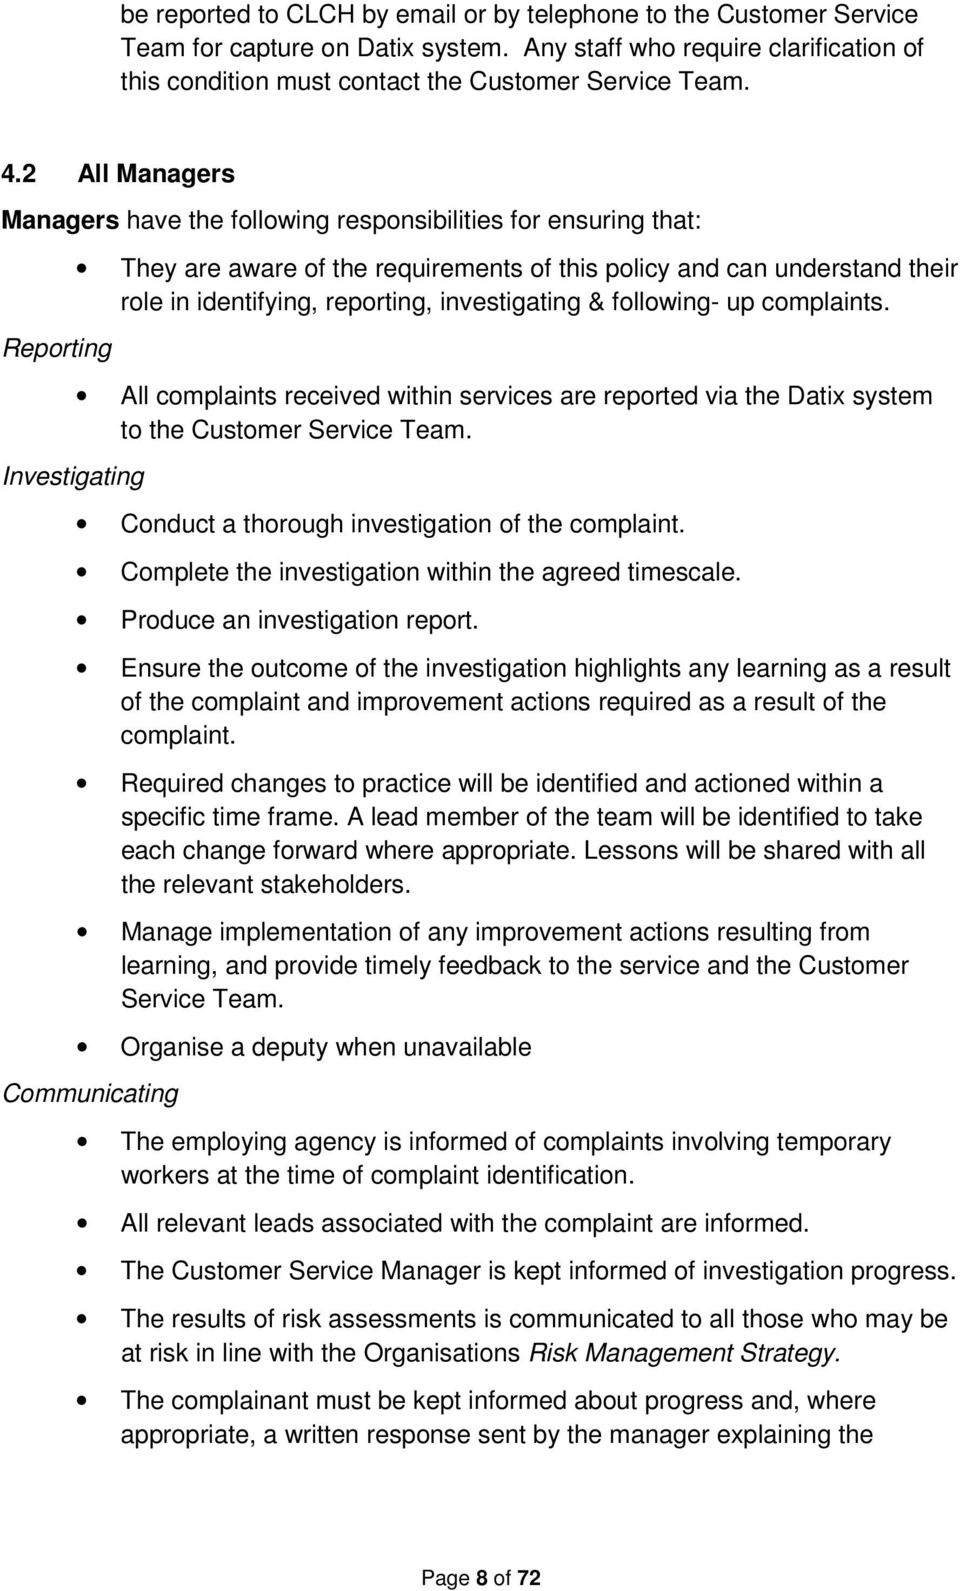 reporting, investigating & following- up complaints. All complaints received within services are reported via the Datix system to the Customer Service Team.